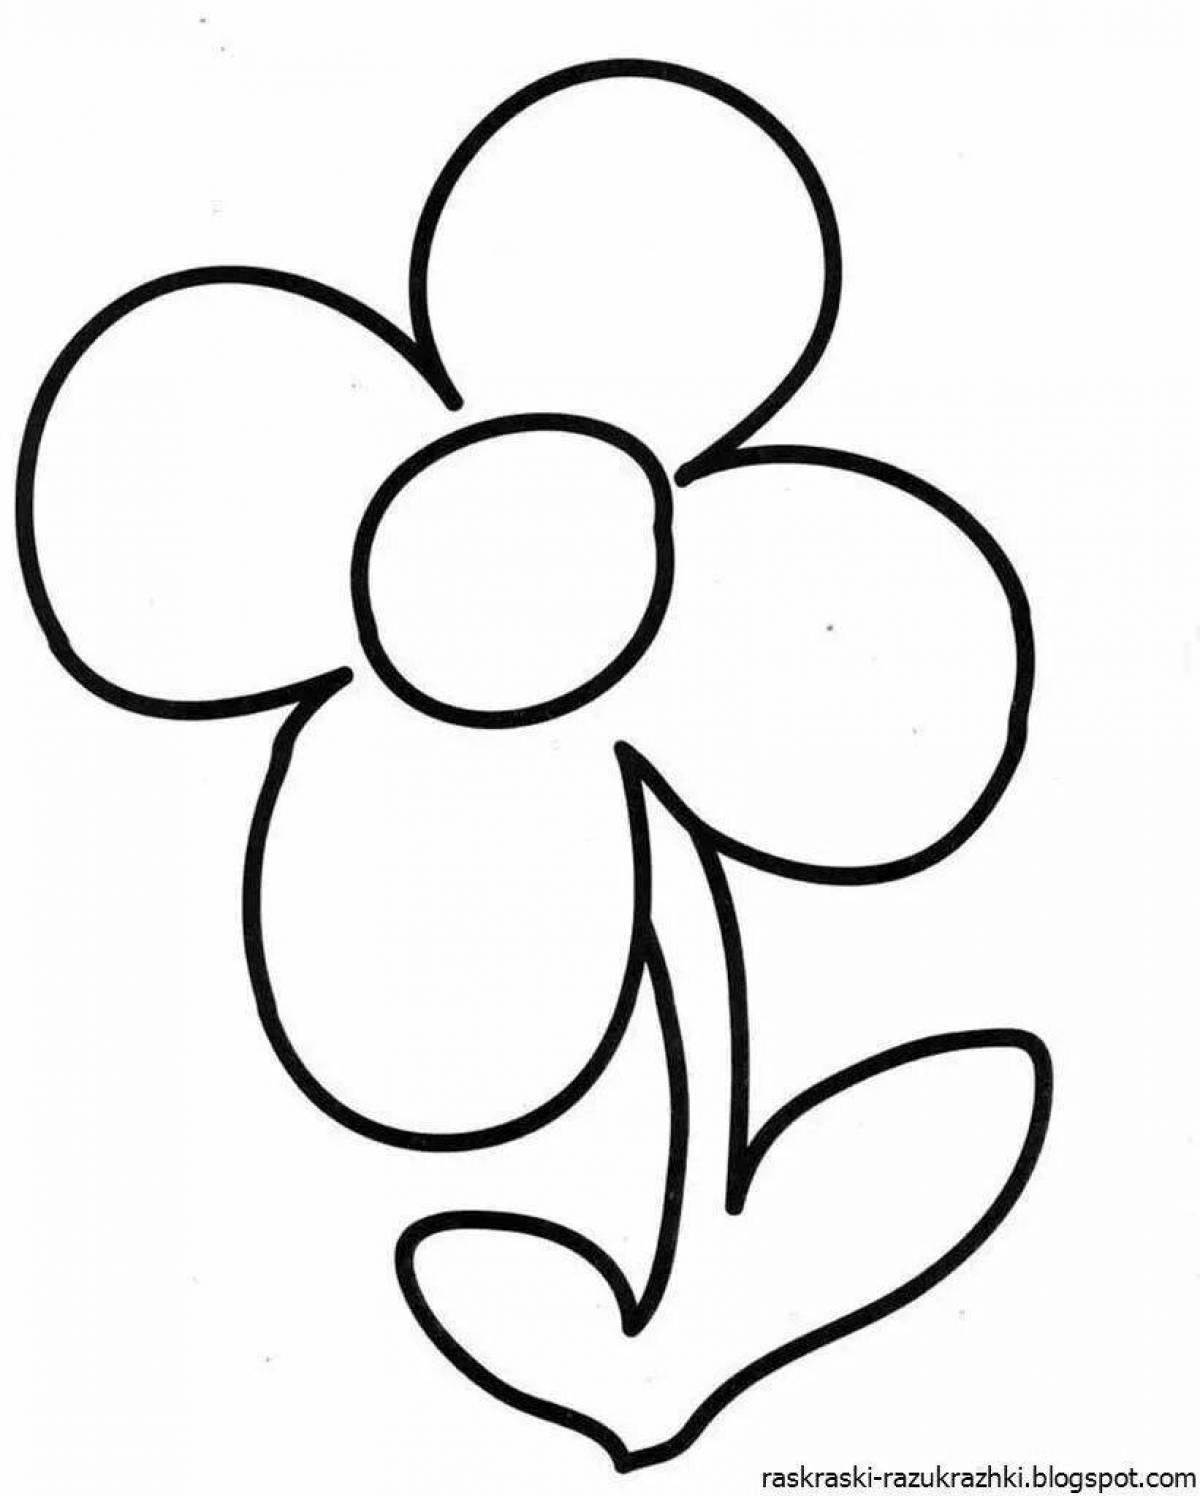 Amazing flower coloring book for toddlers 2 3 years old